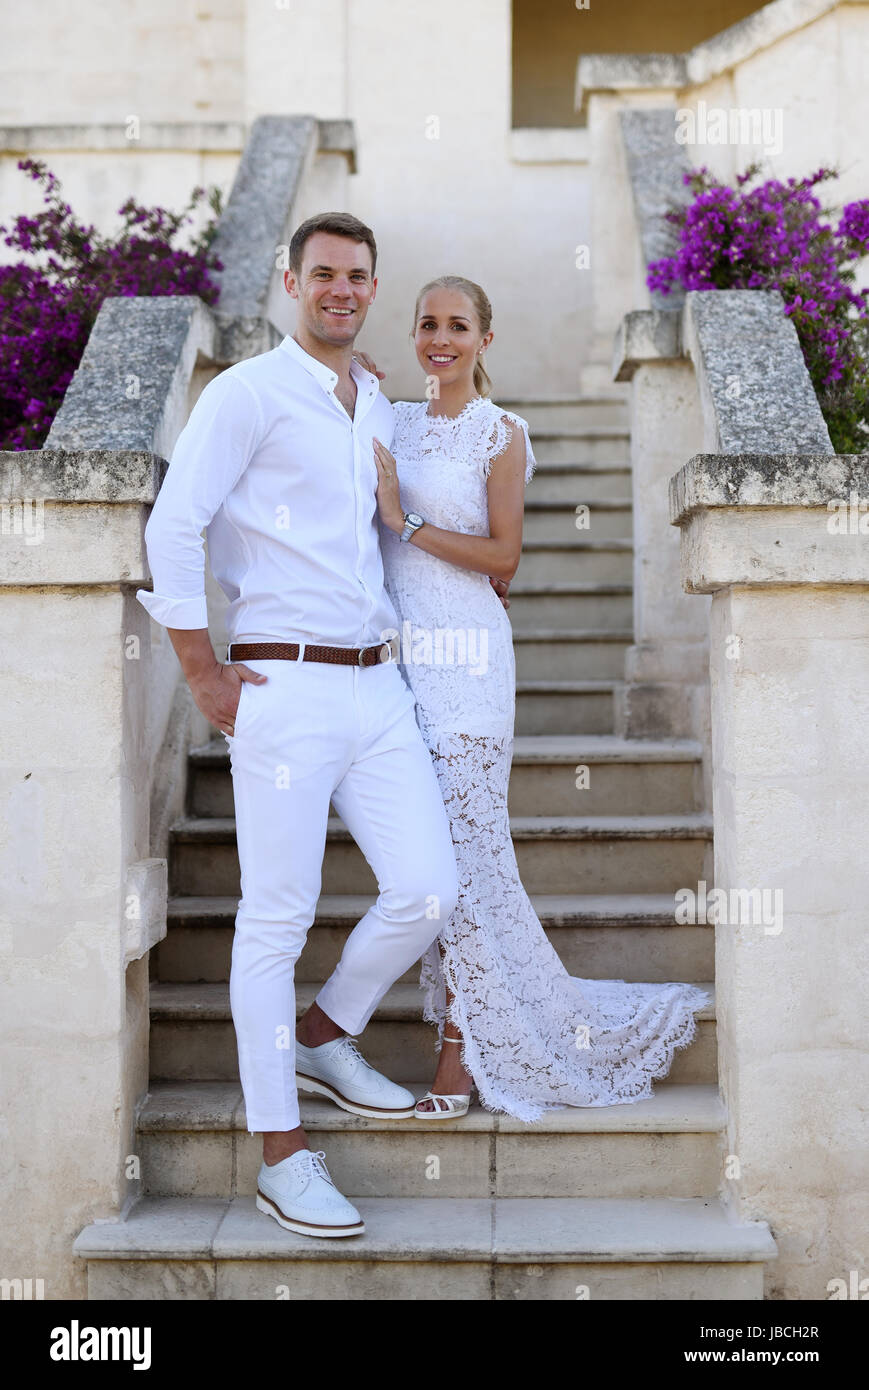 dpatop - HANDOUT - A handout picture made available on 09 June 2017 shows German soccer national player and German Bundesliga goalkeeper of the FC Bayern Munich, Manuel Neuer, and his wife Nina Neuer (née Weiss) shortly after the church wedding in Monopoli, Italy, 09 June 2017.   (ATTENTION EDITORS: FOR EDITORIAL USE ONLY IN CONNECTION WITH CURRENT REPORTING/ MANDATORY CREDIT) · NO WIRE SERVICE · Photo: Pia Clodi/peachesandmint.com/dpa Stock Photo